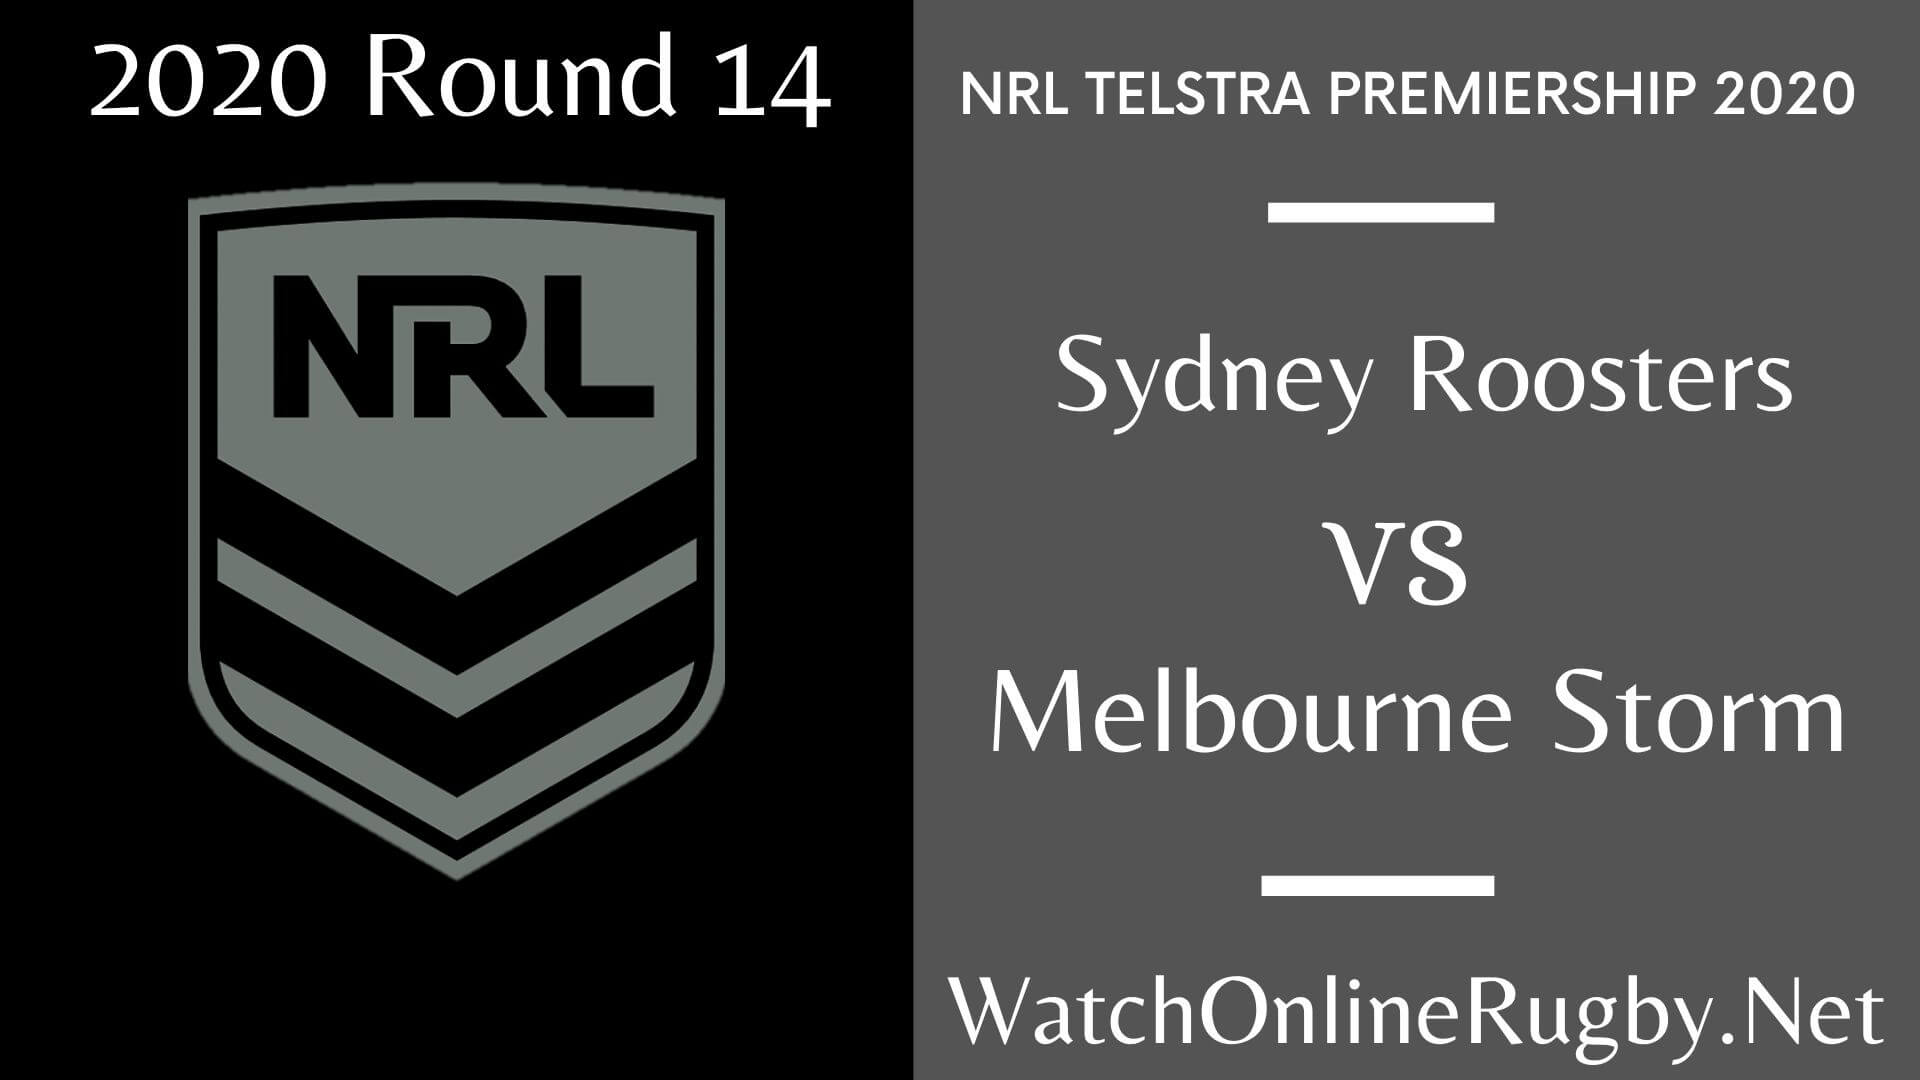 Sydney Roosters Vs Melbourne Storm Highlights 2020 Round 14 NRL Rugby